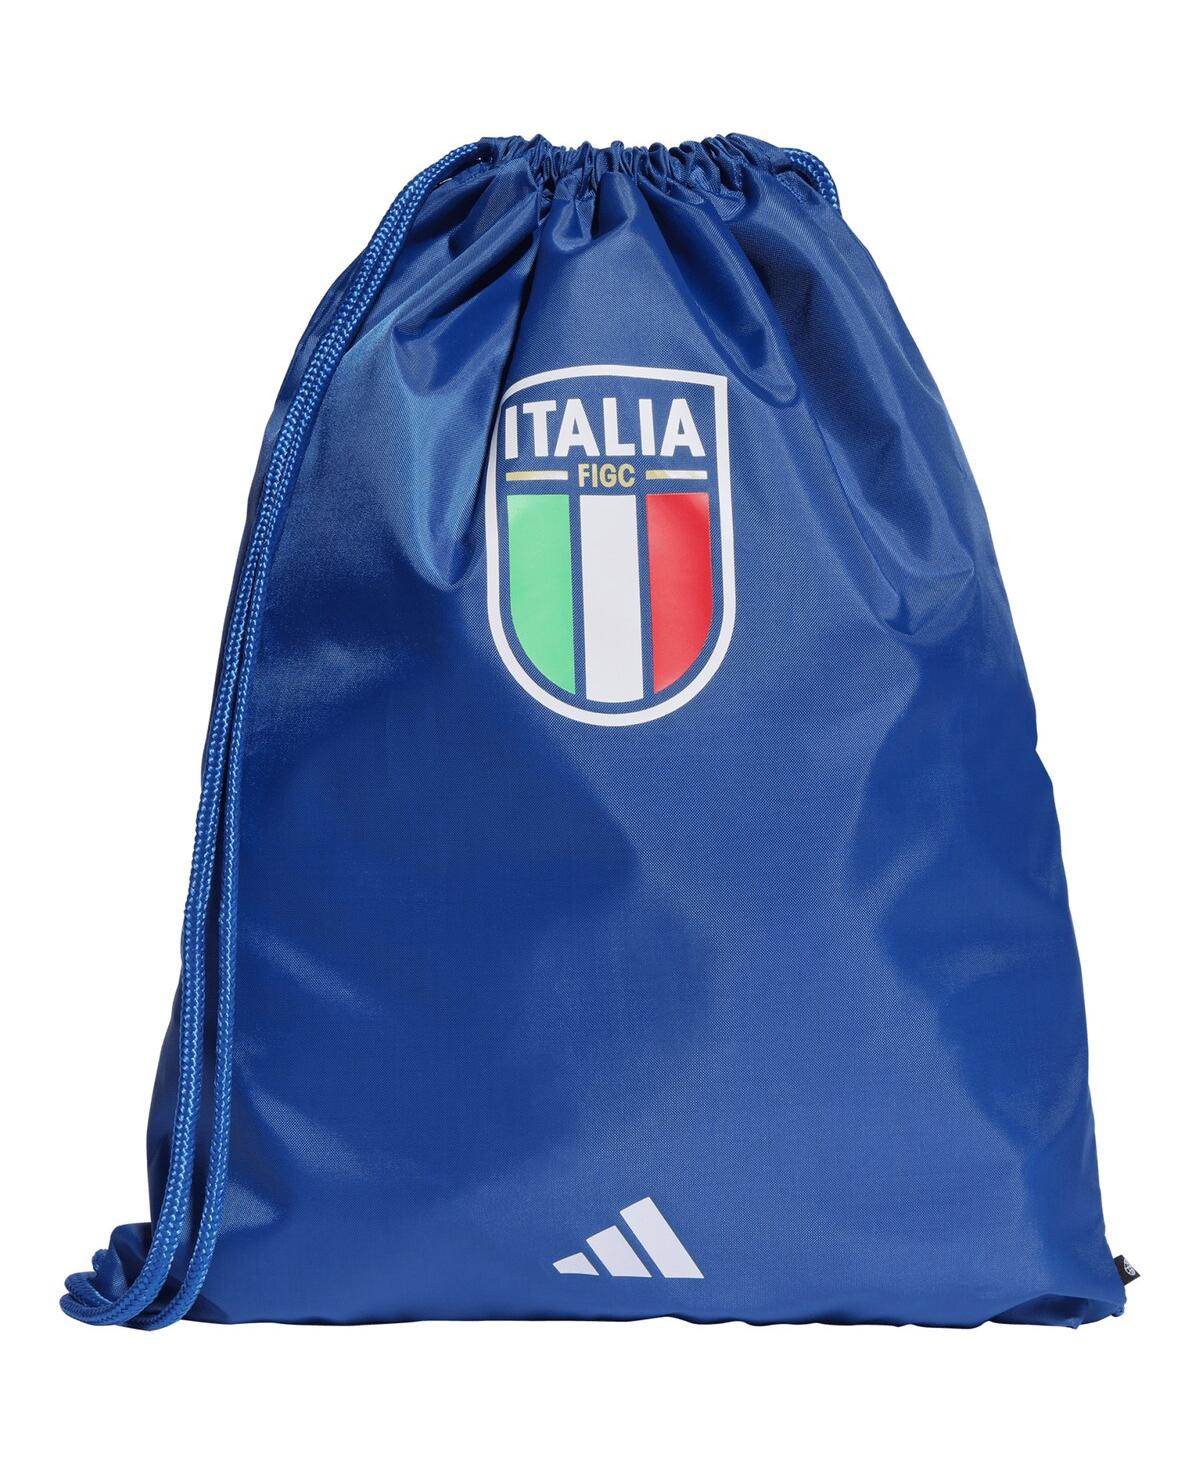 Adidas Originals Men's And Women's Adidas Italy National Team Gym Sack In Blue,white